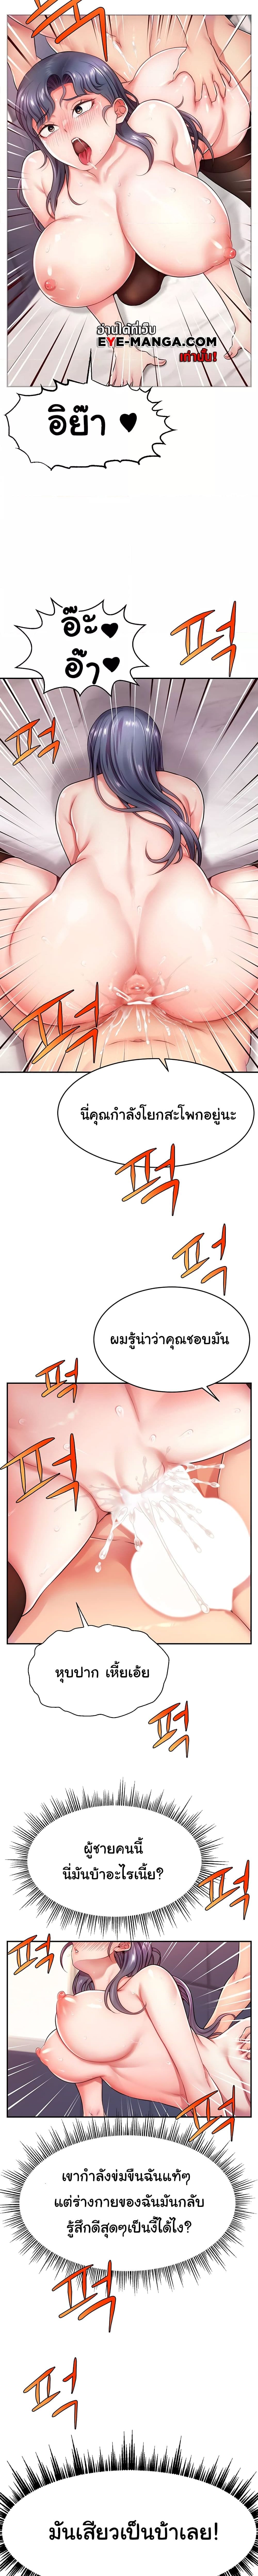 Making Friends With Streamers by Hacking! ตอนที่ 2 ภาพ 18